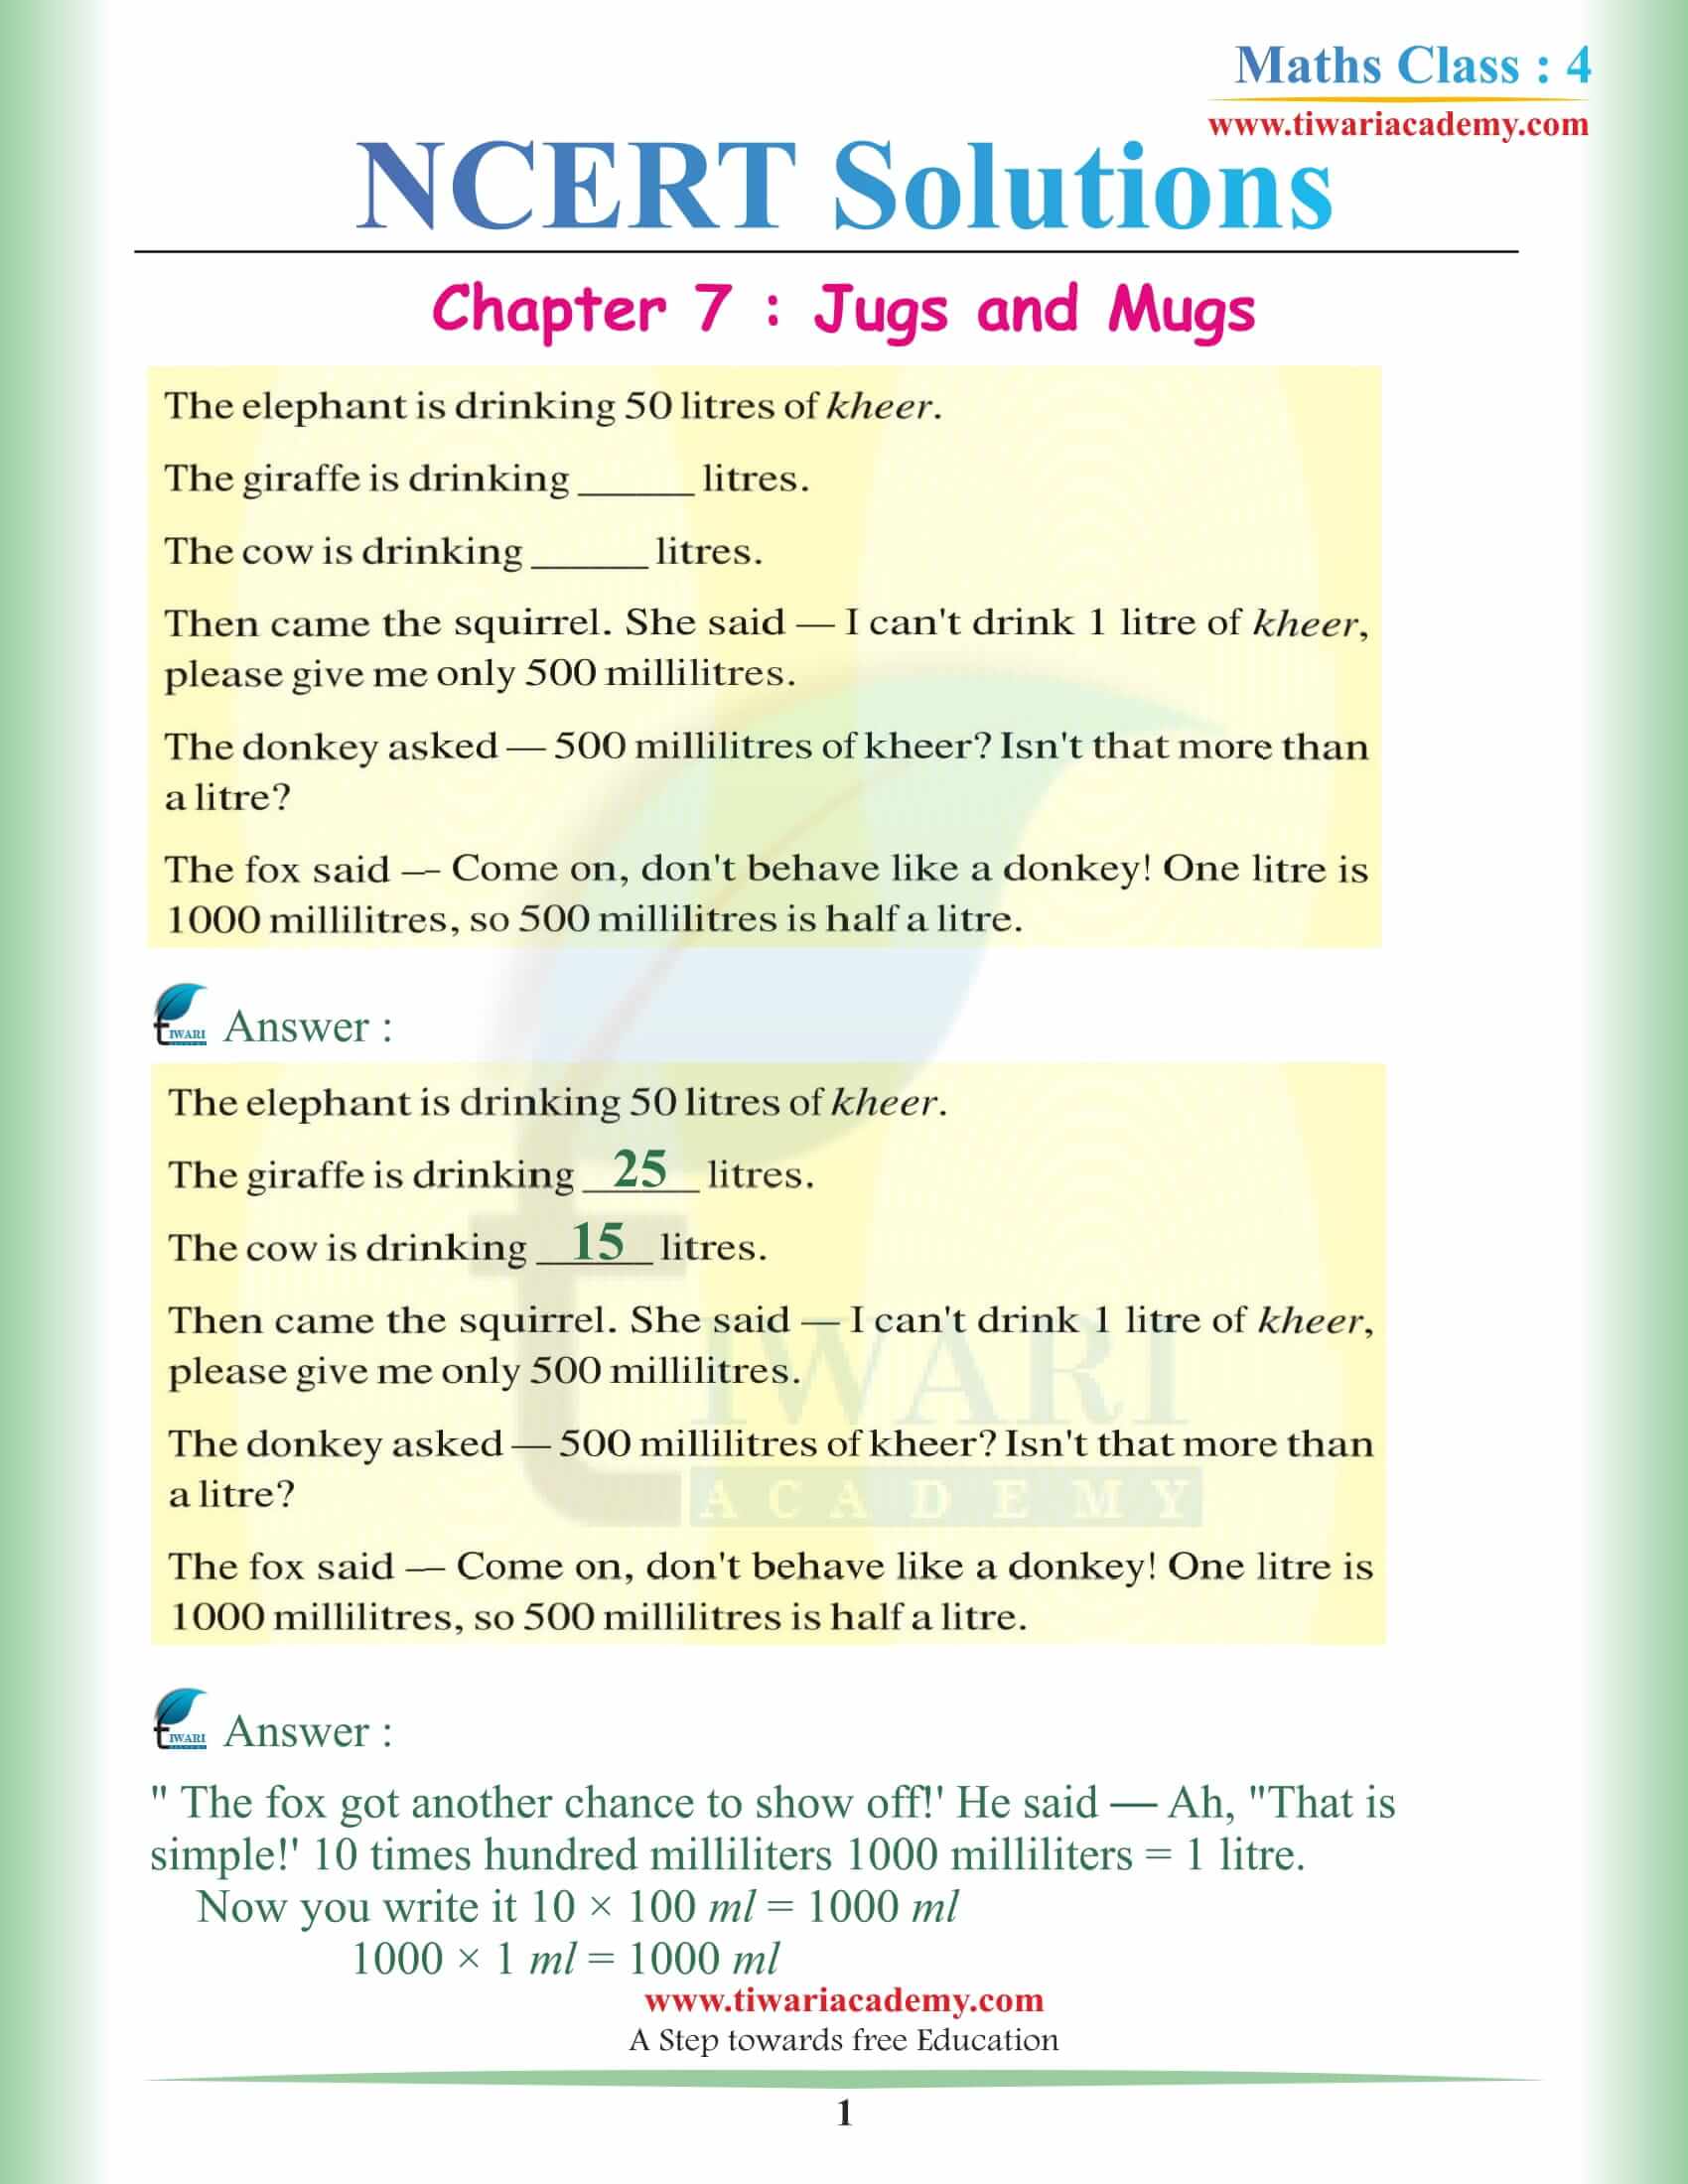 NCERT Solutions for Class 4 Maths Chapter 7 Jugs and Mugs